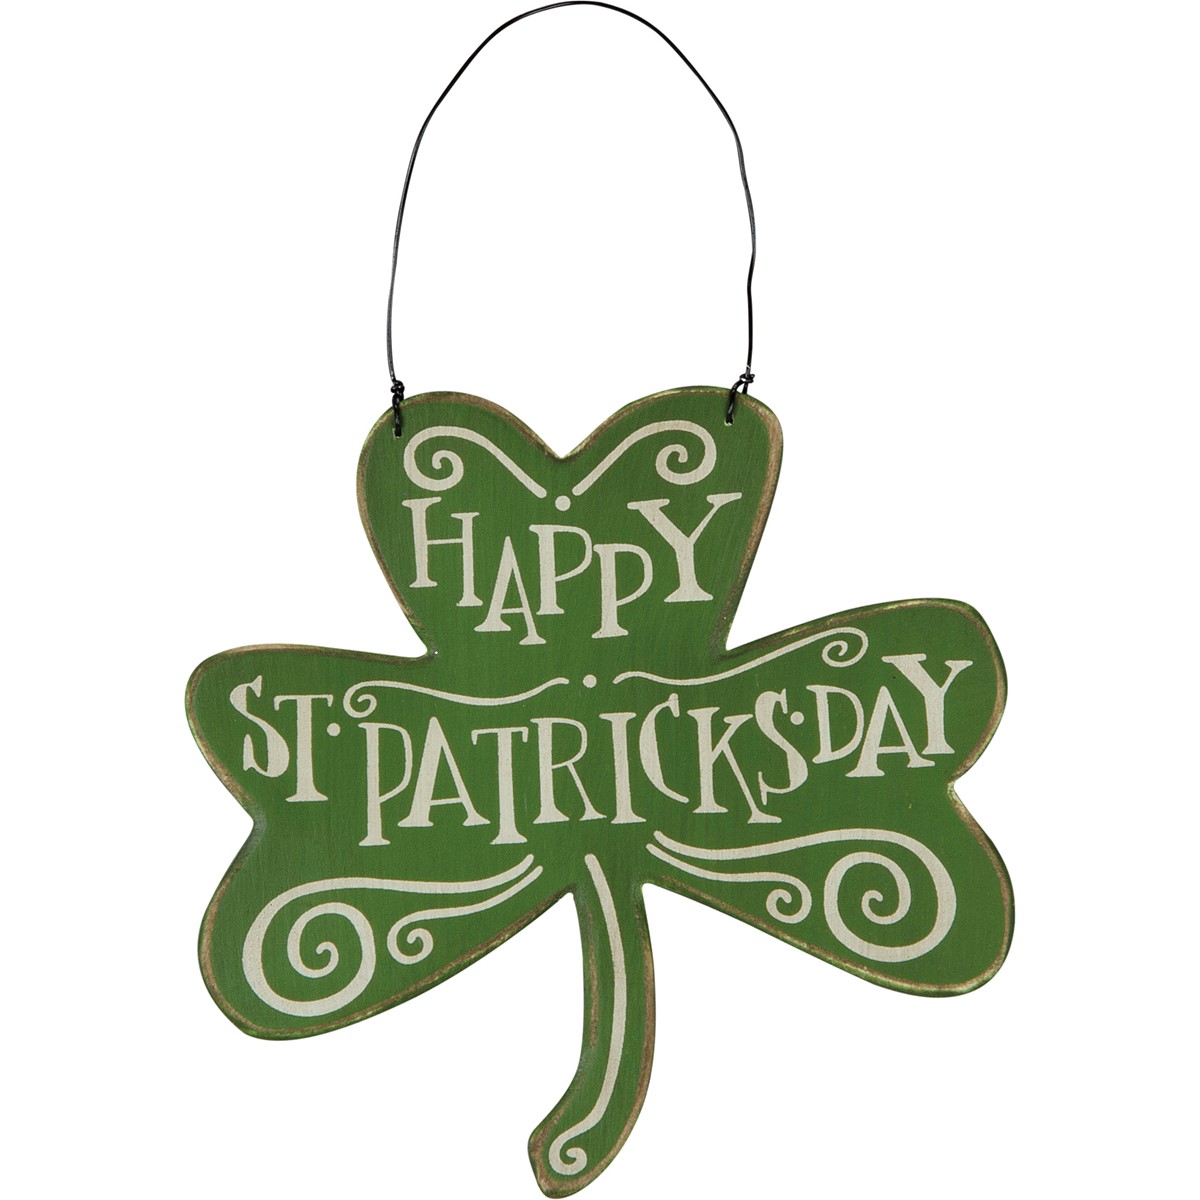 St. Patrick's Day Ornament - Wood, Wire